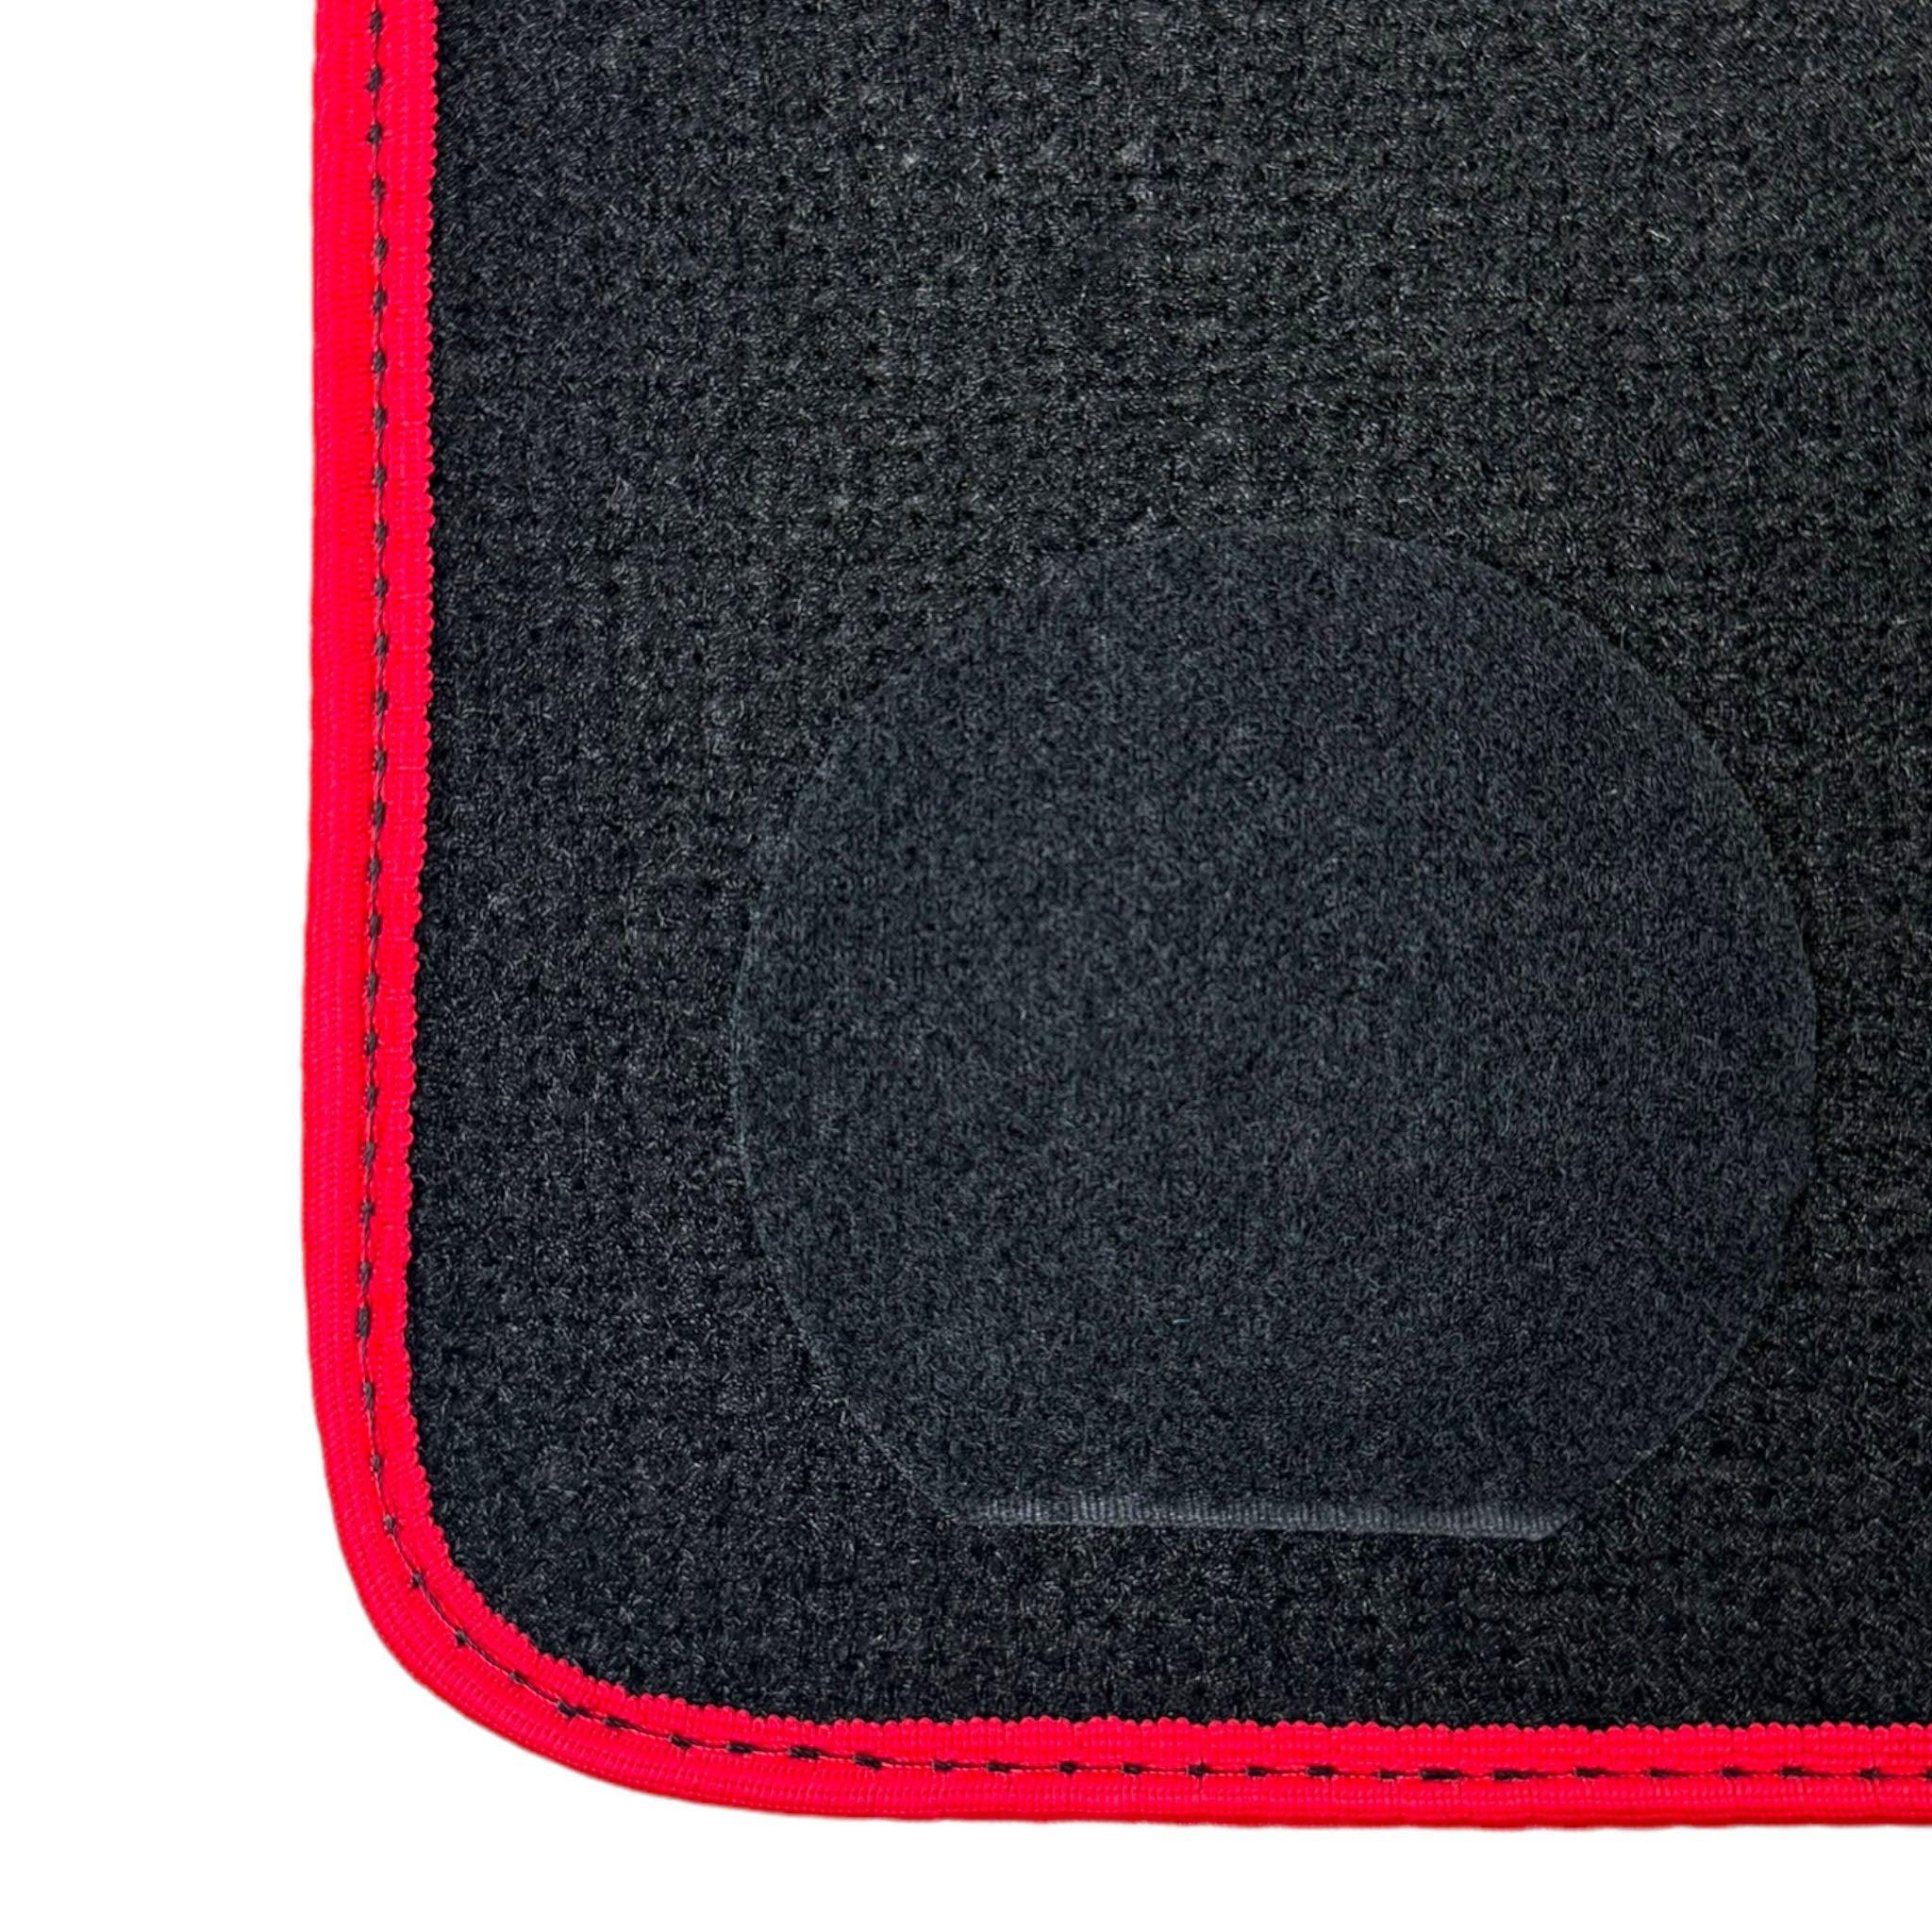 Black Floor Mats For BMW 1 Series E88 Convertible | Red Trim